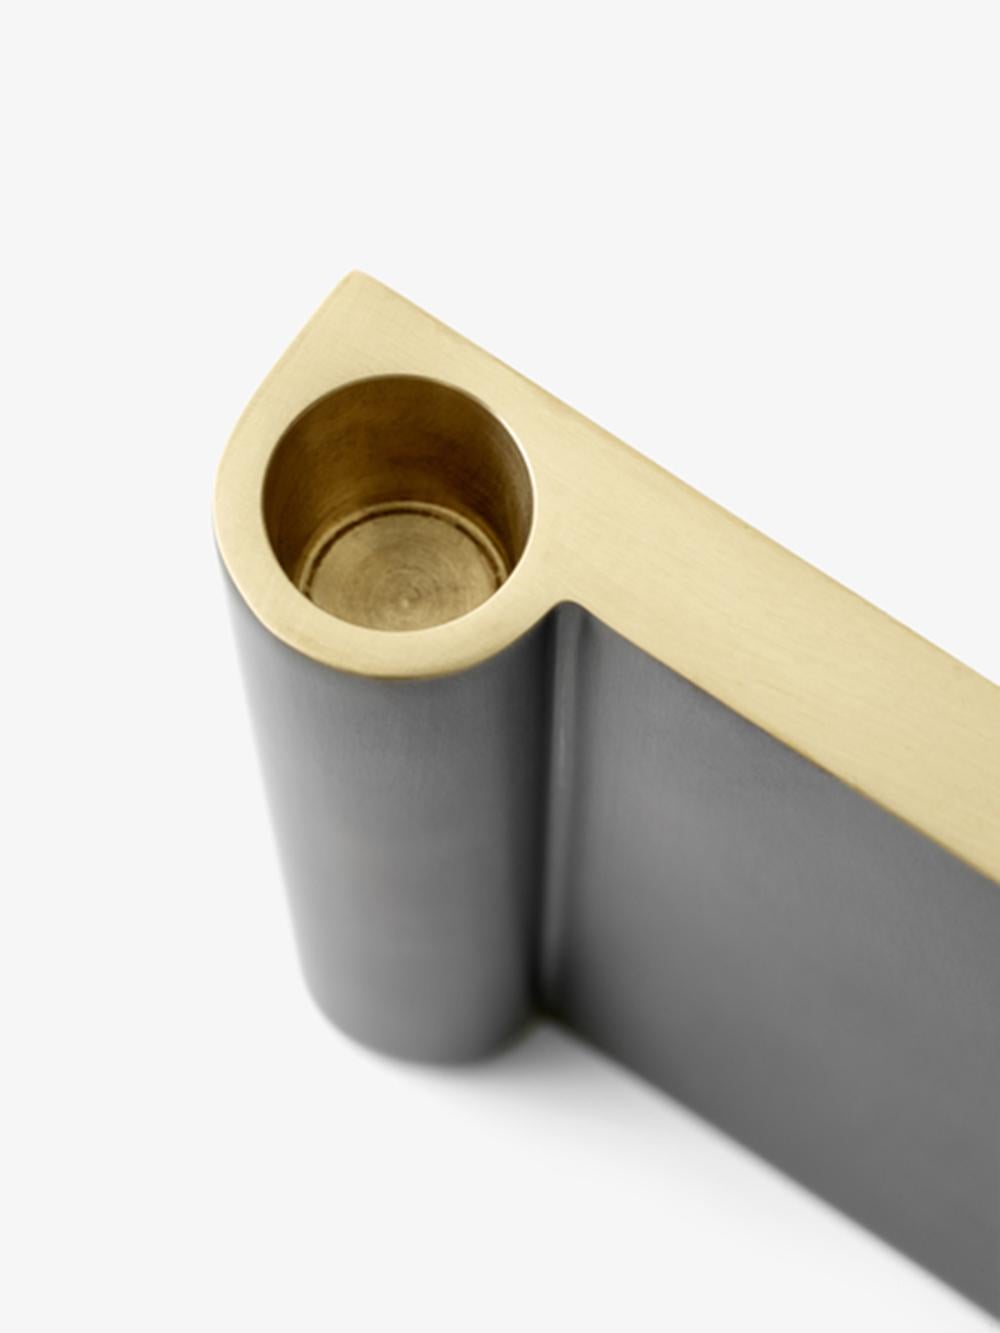 This bronzed brass candle holder is the biggest of the candle holders, within the Collect series, a curated line of beautifully crafted soft furnishings and home objects. 
Designed by Space Copenhagen, for a handsome addition to the home.
Made